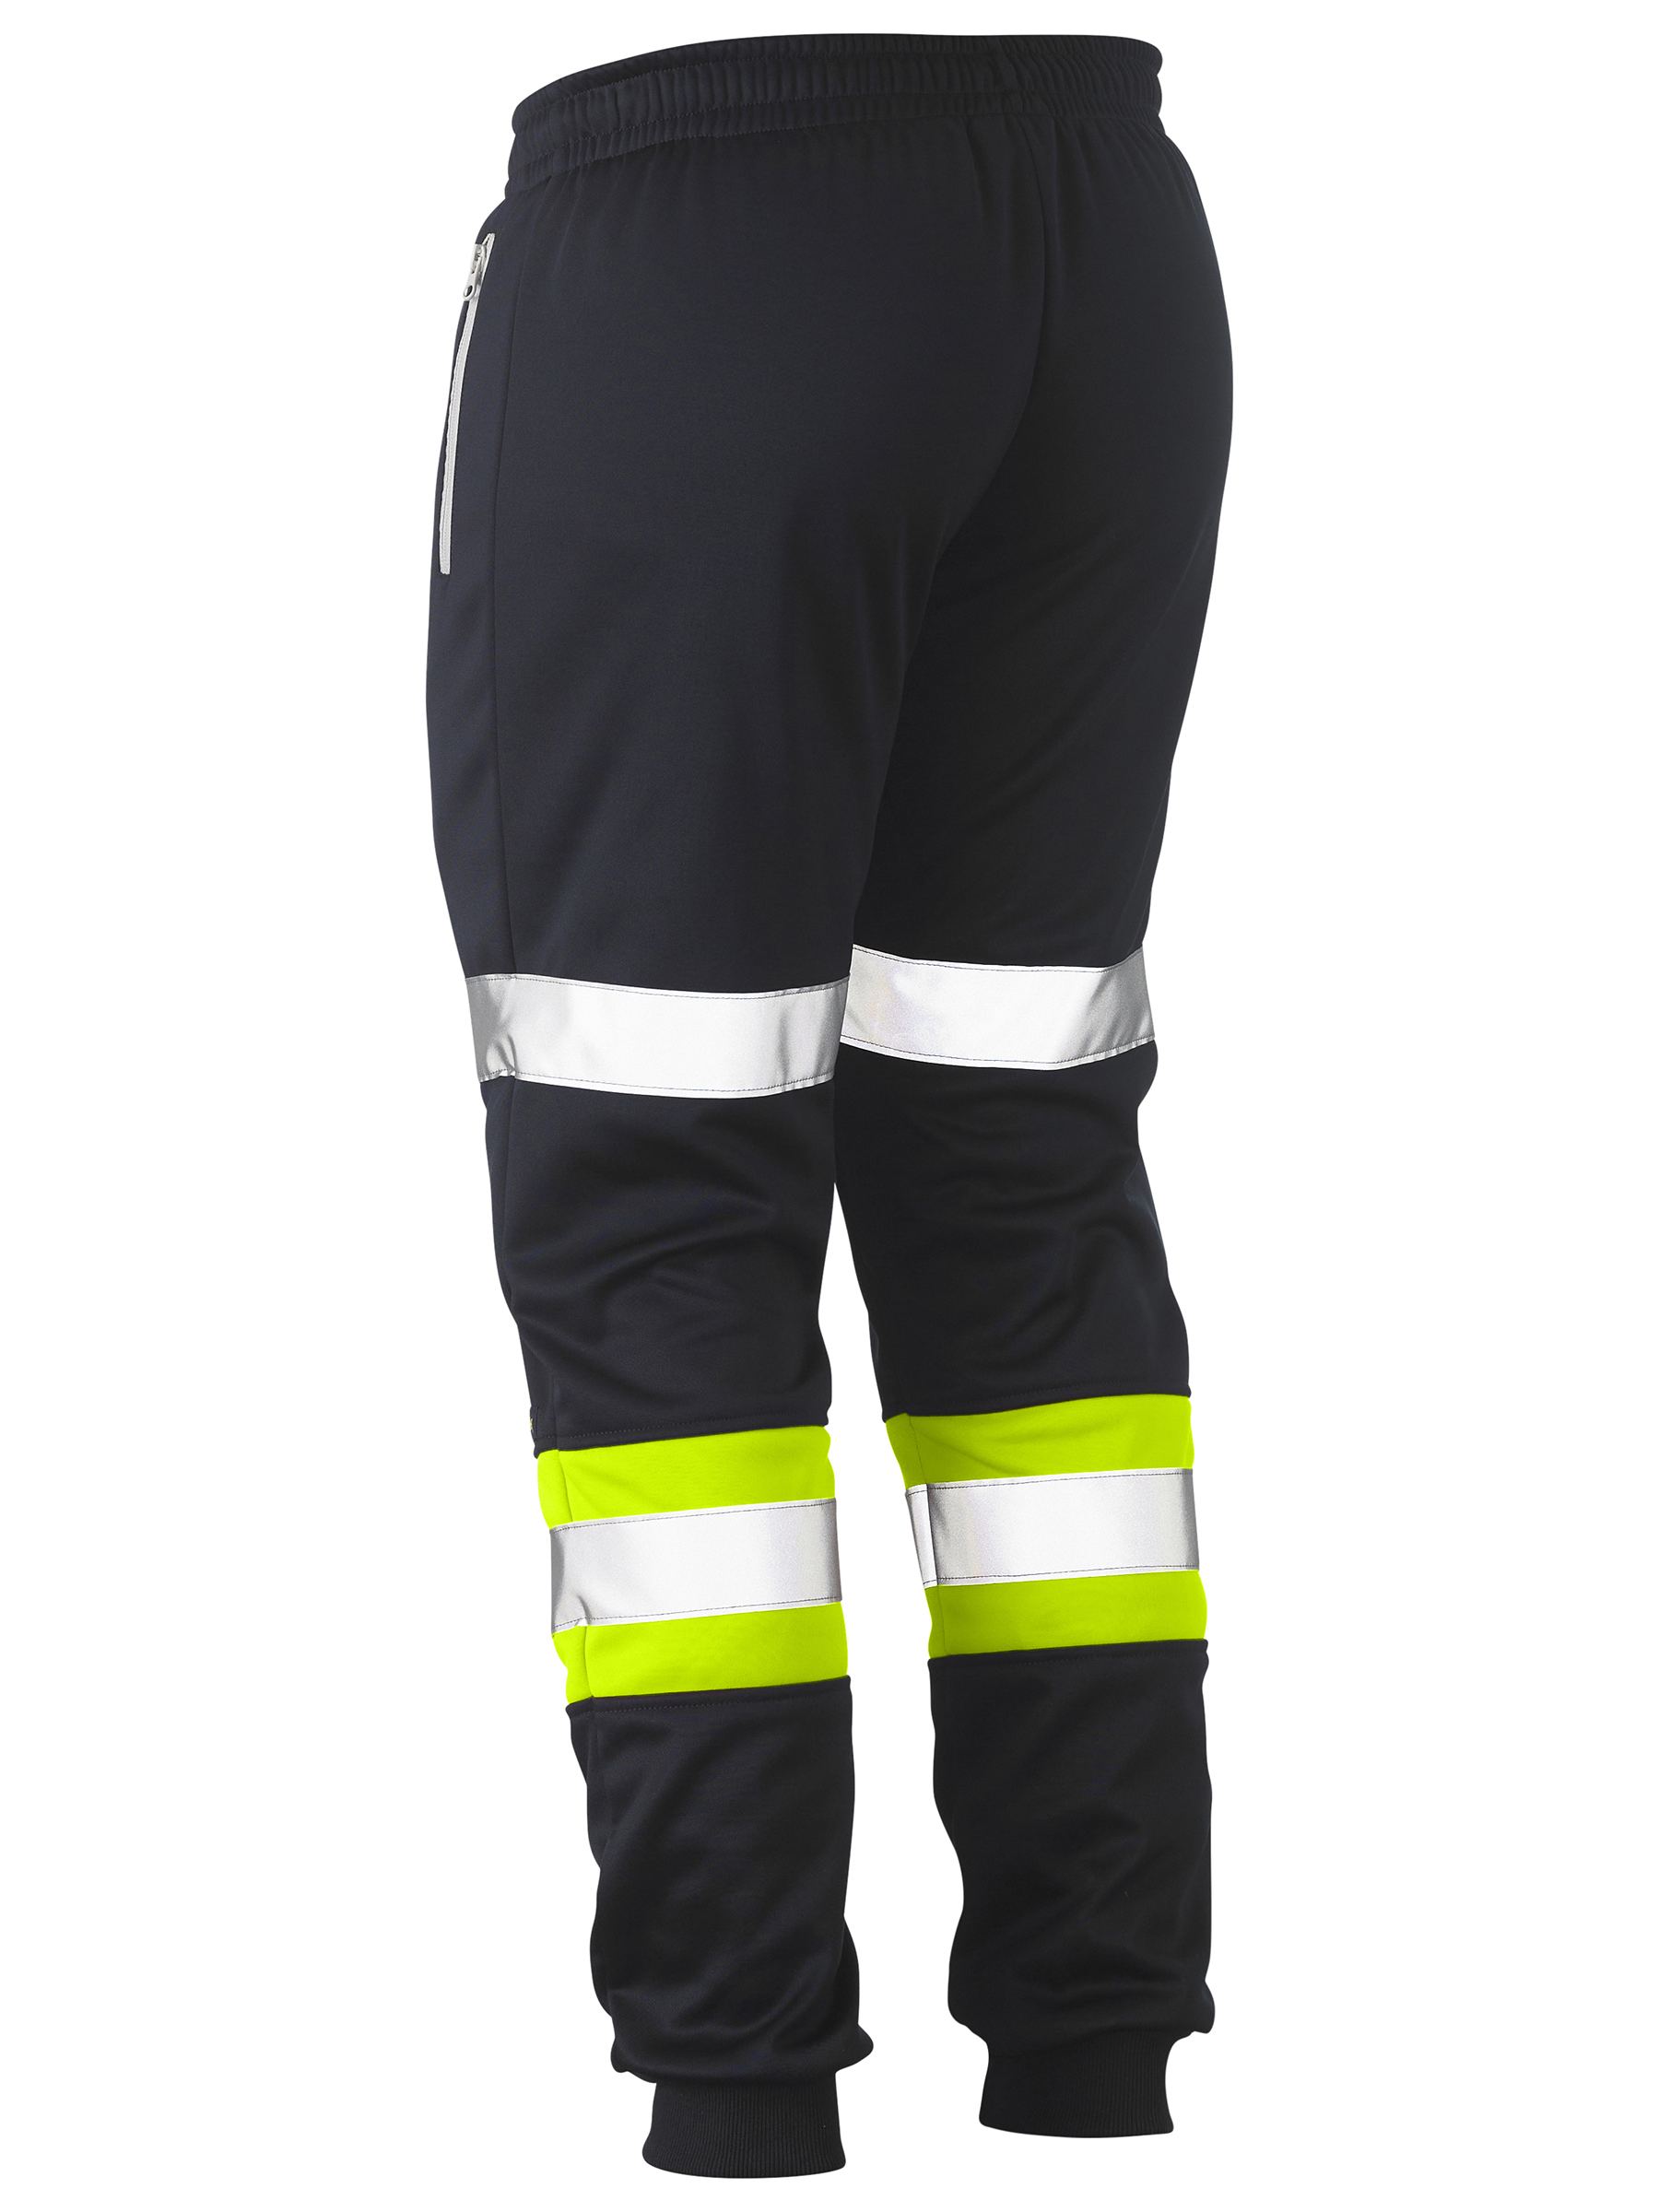 Taped pants drawcord - elasticised - with biomotion full track Bisley waist Workwear with BPK6202T